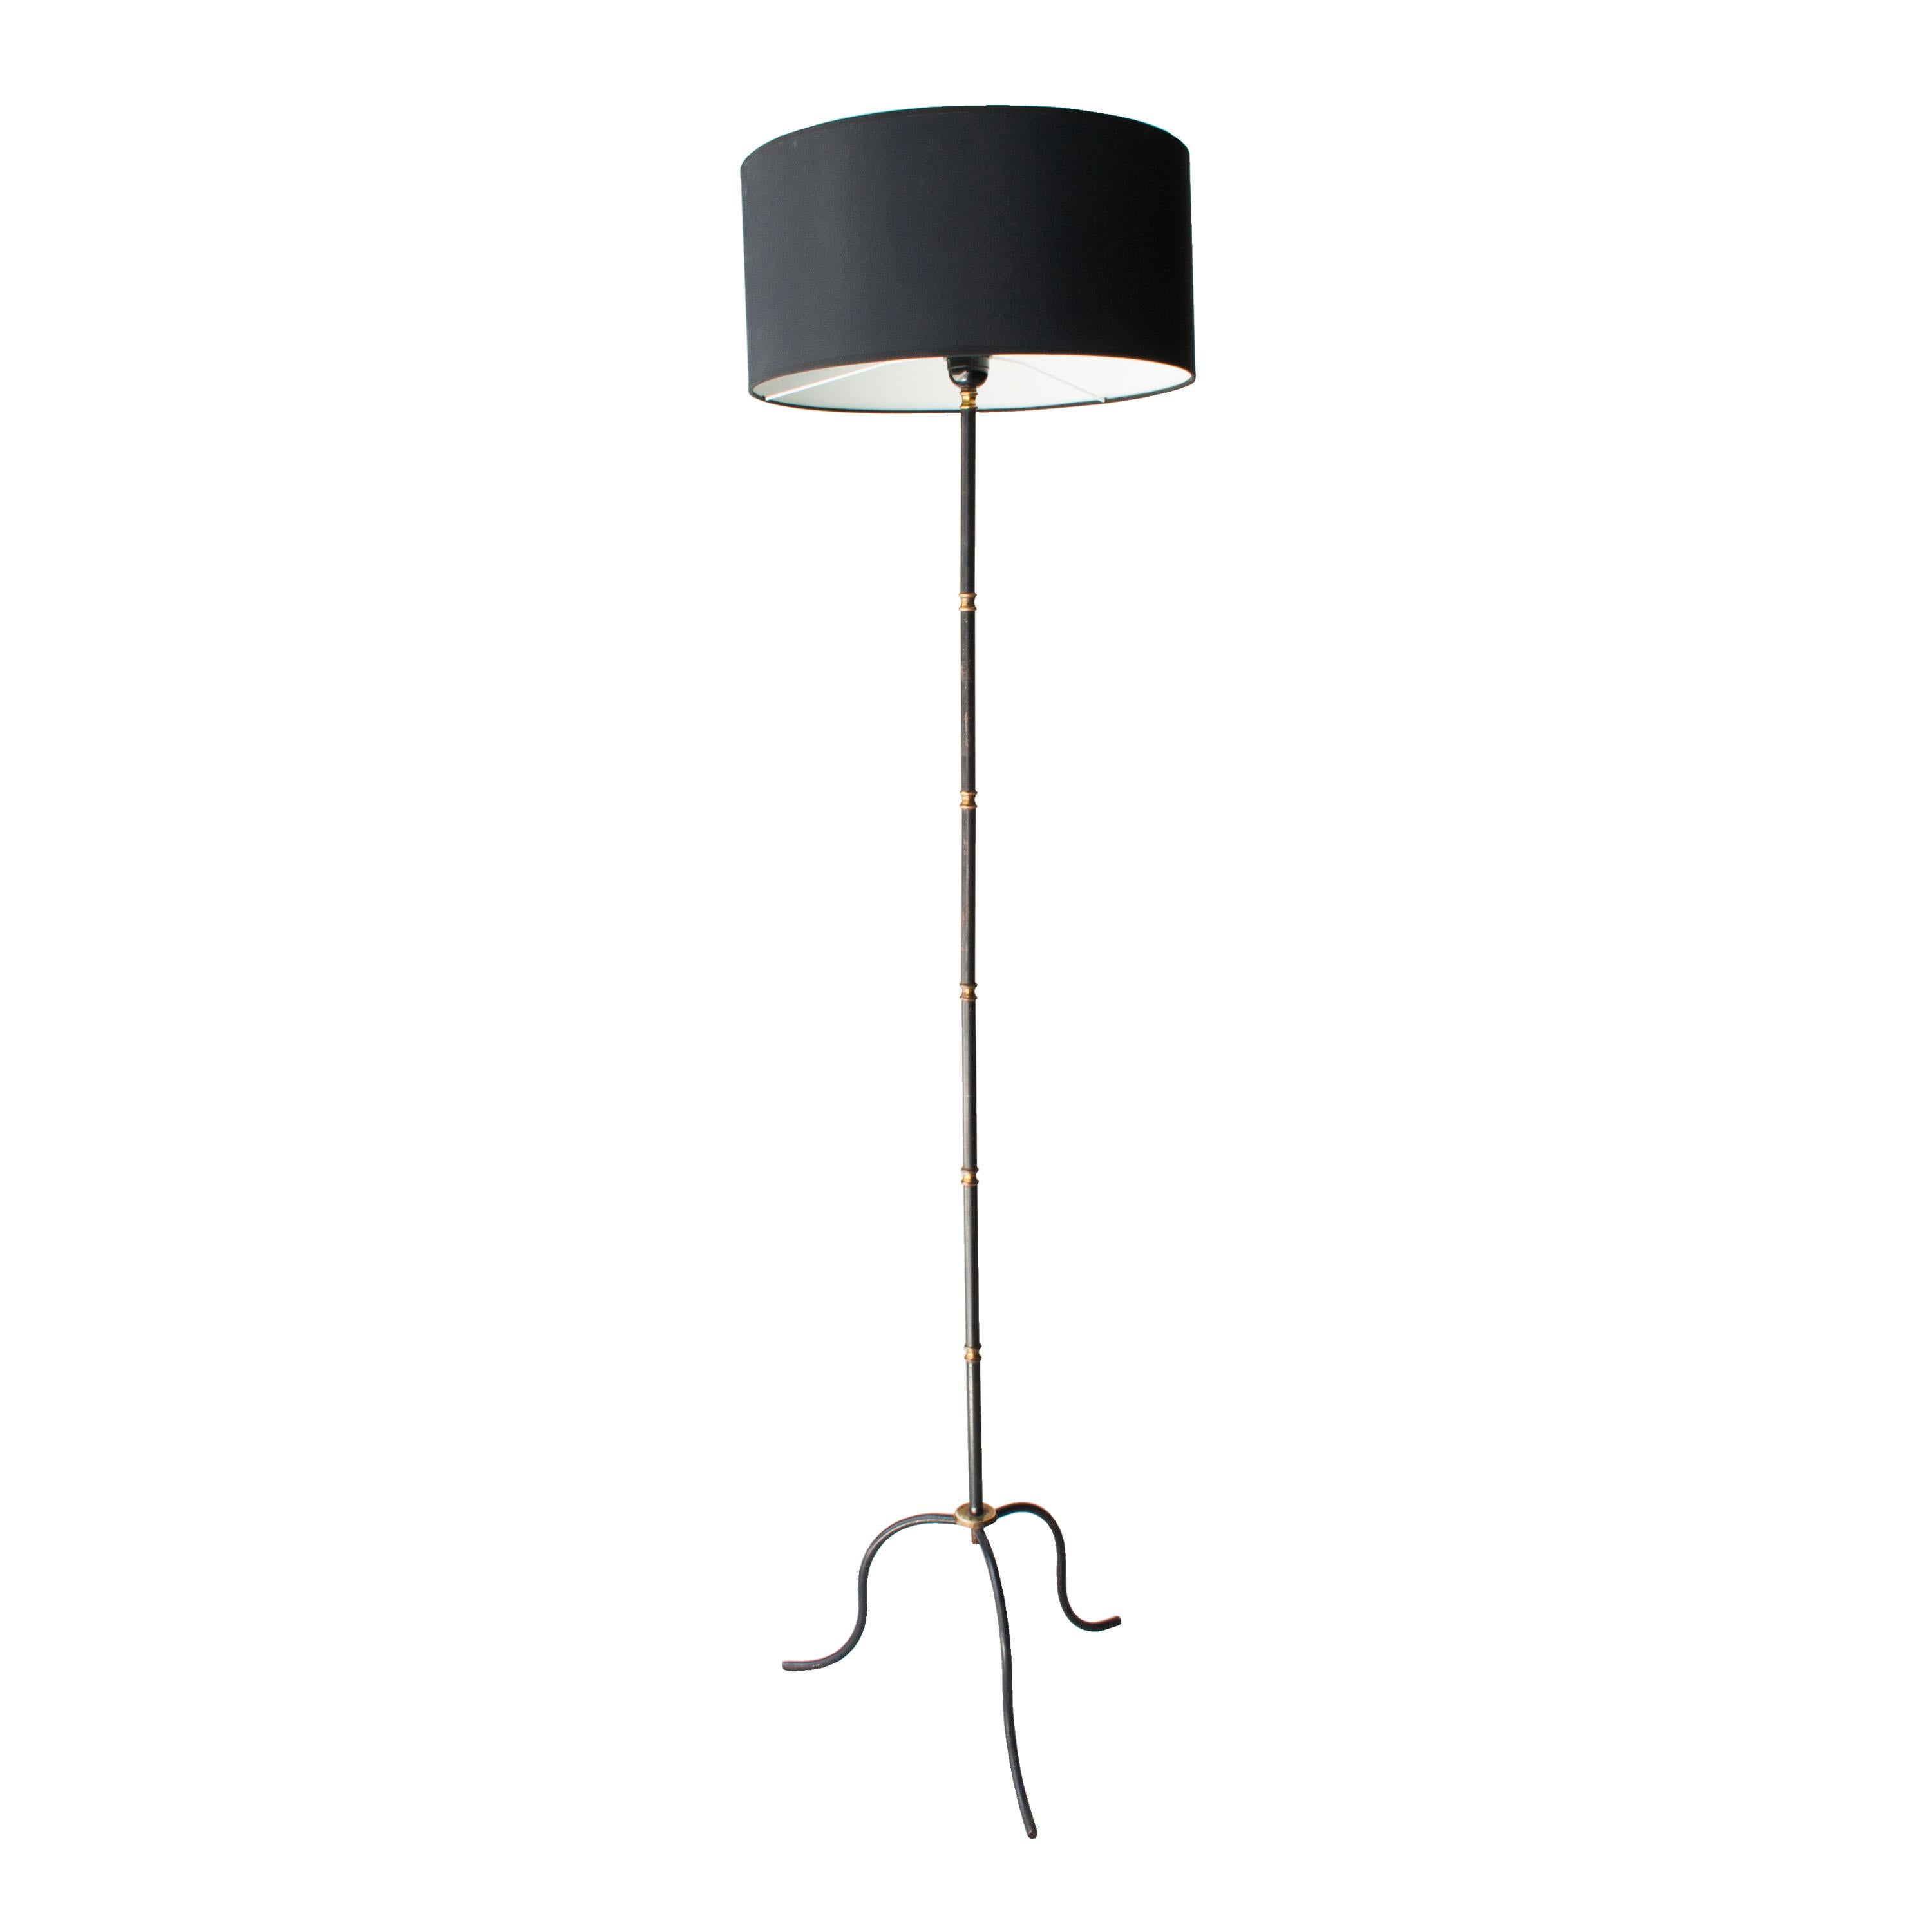 Floor lamp made in forge with brass details and screen made in black Chintz.